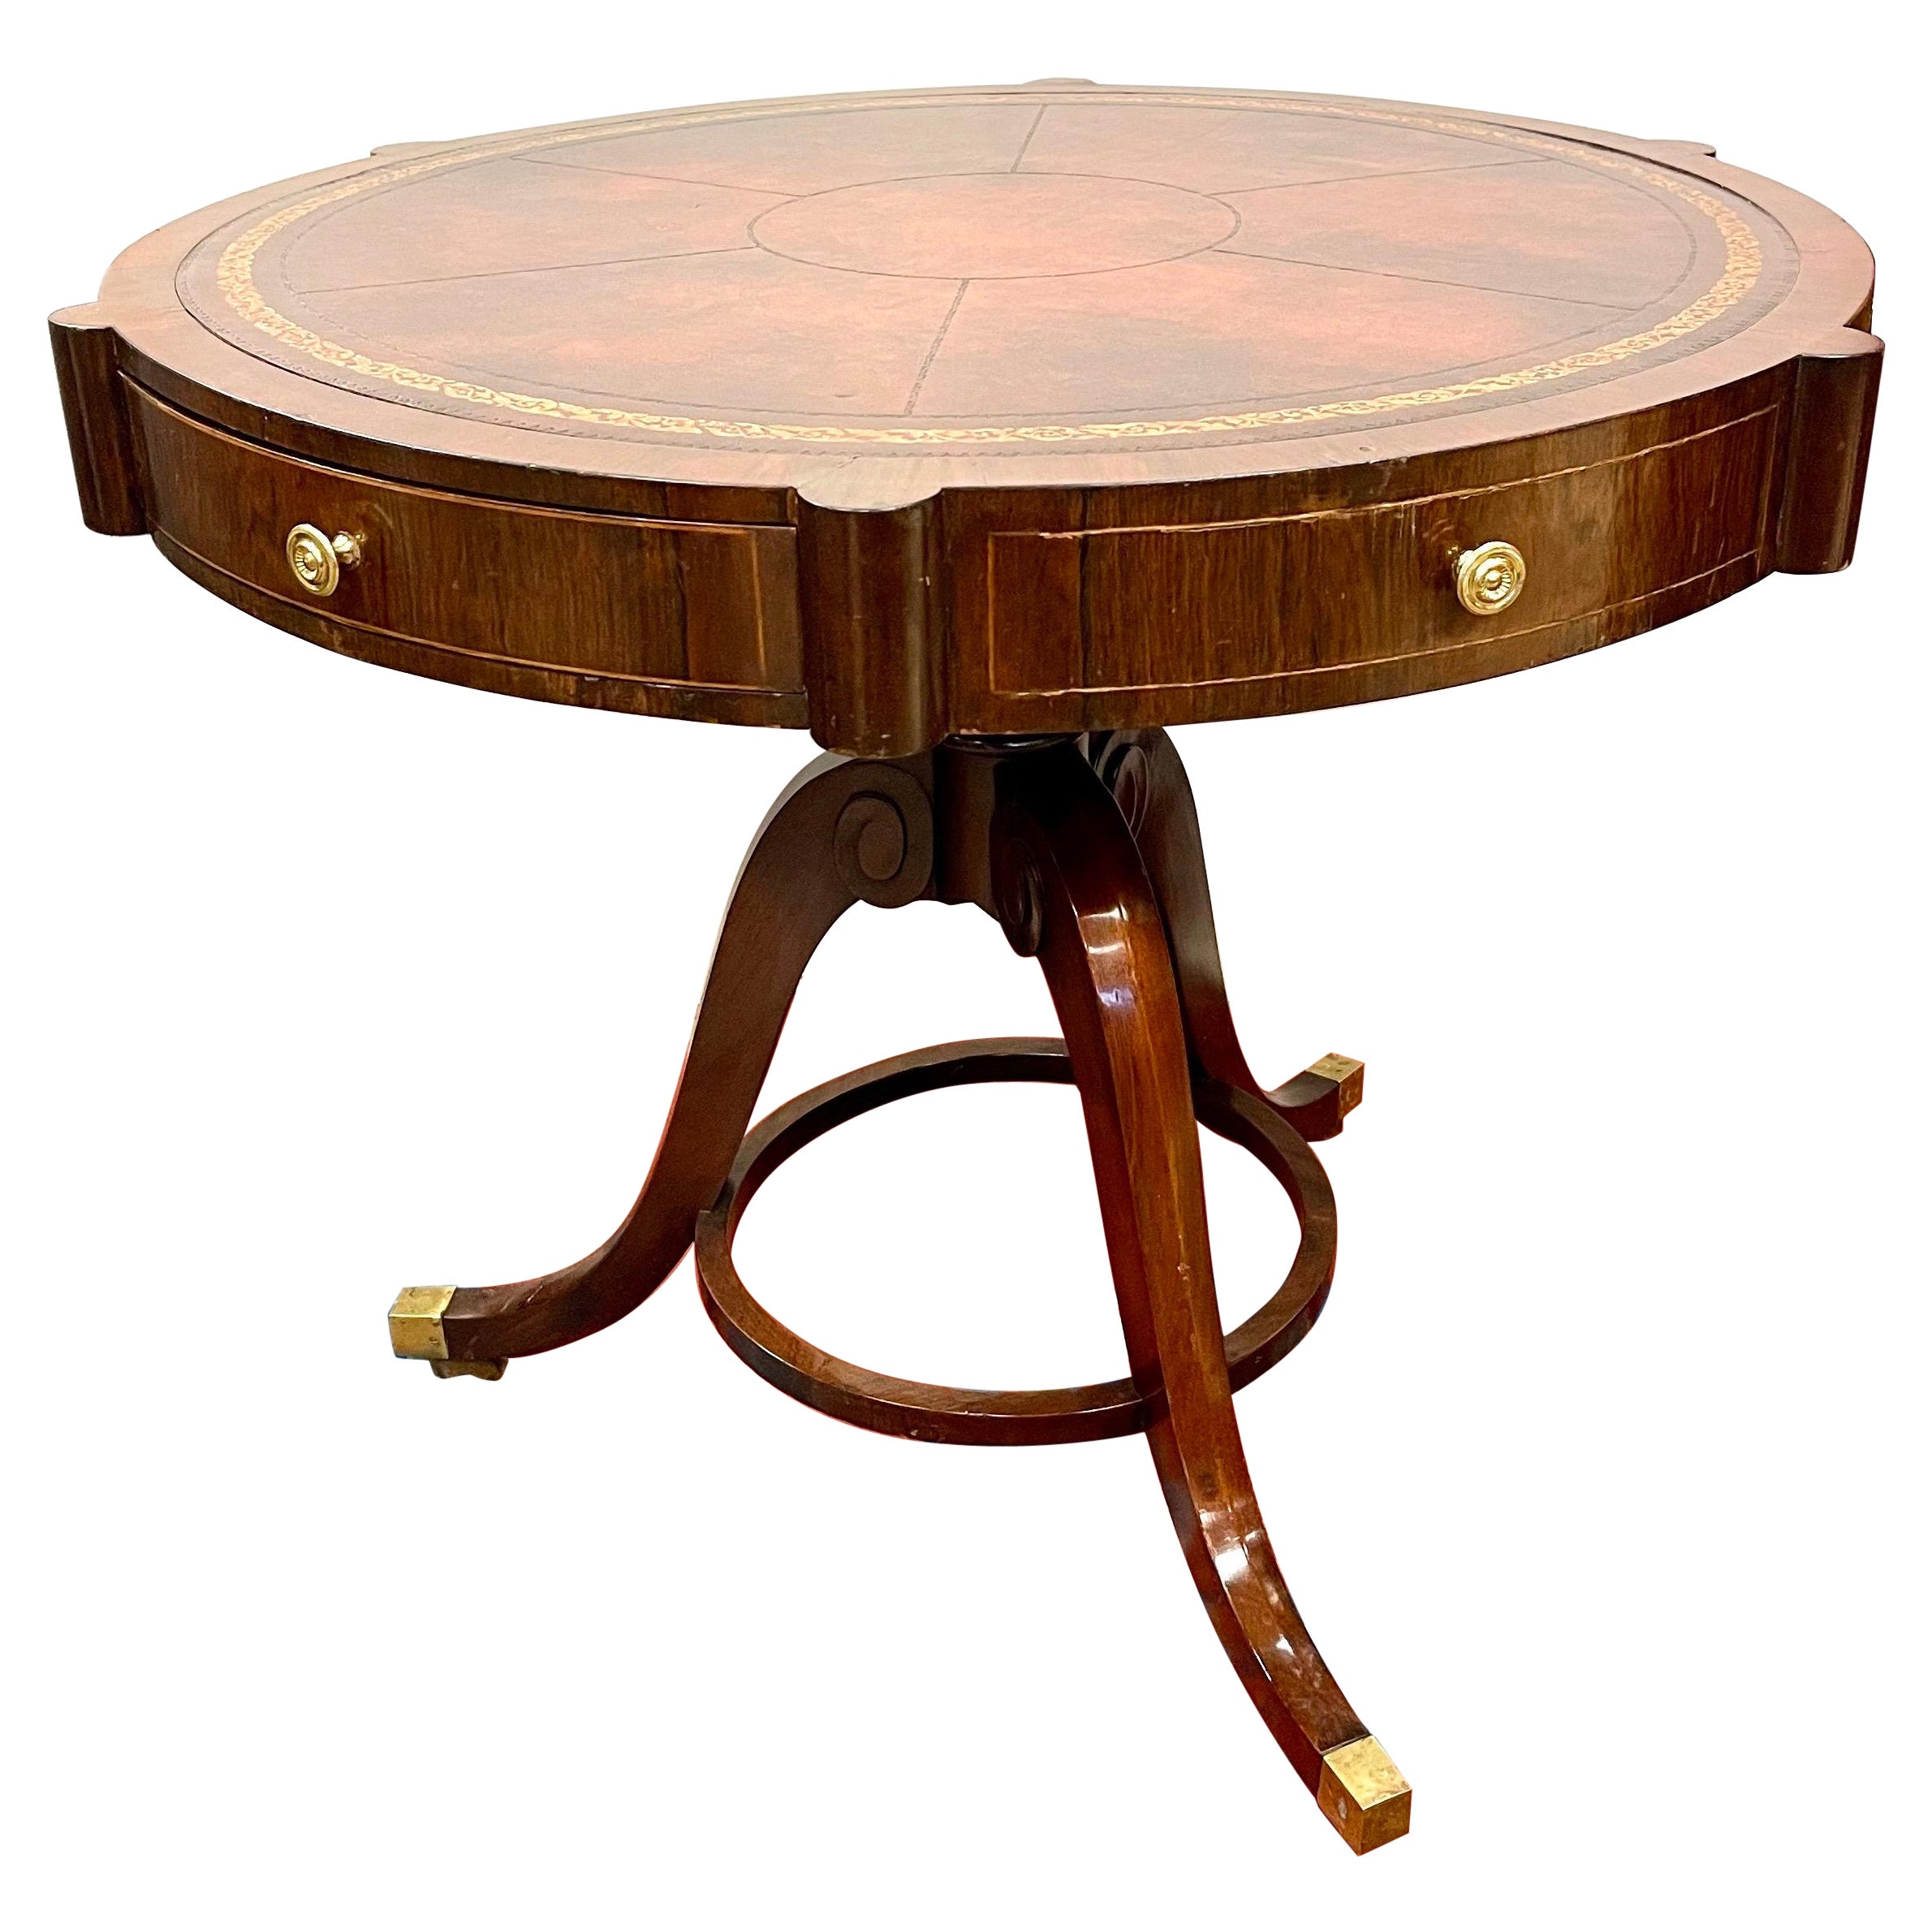 Regency Mahogany Drum Table with Leather Top on Caster Wheels